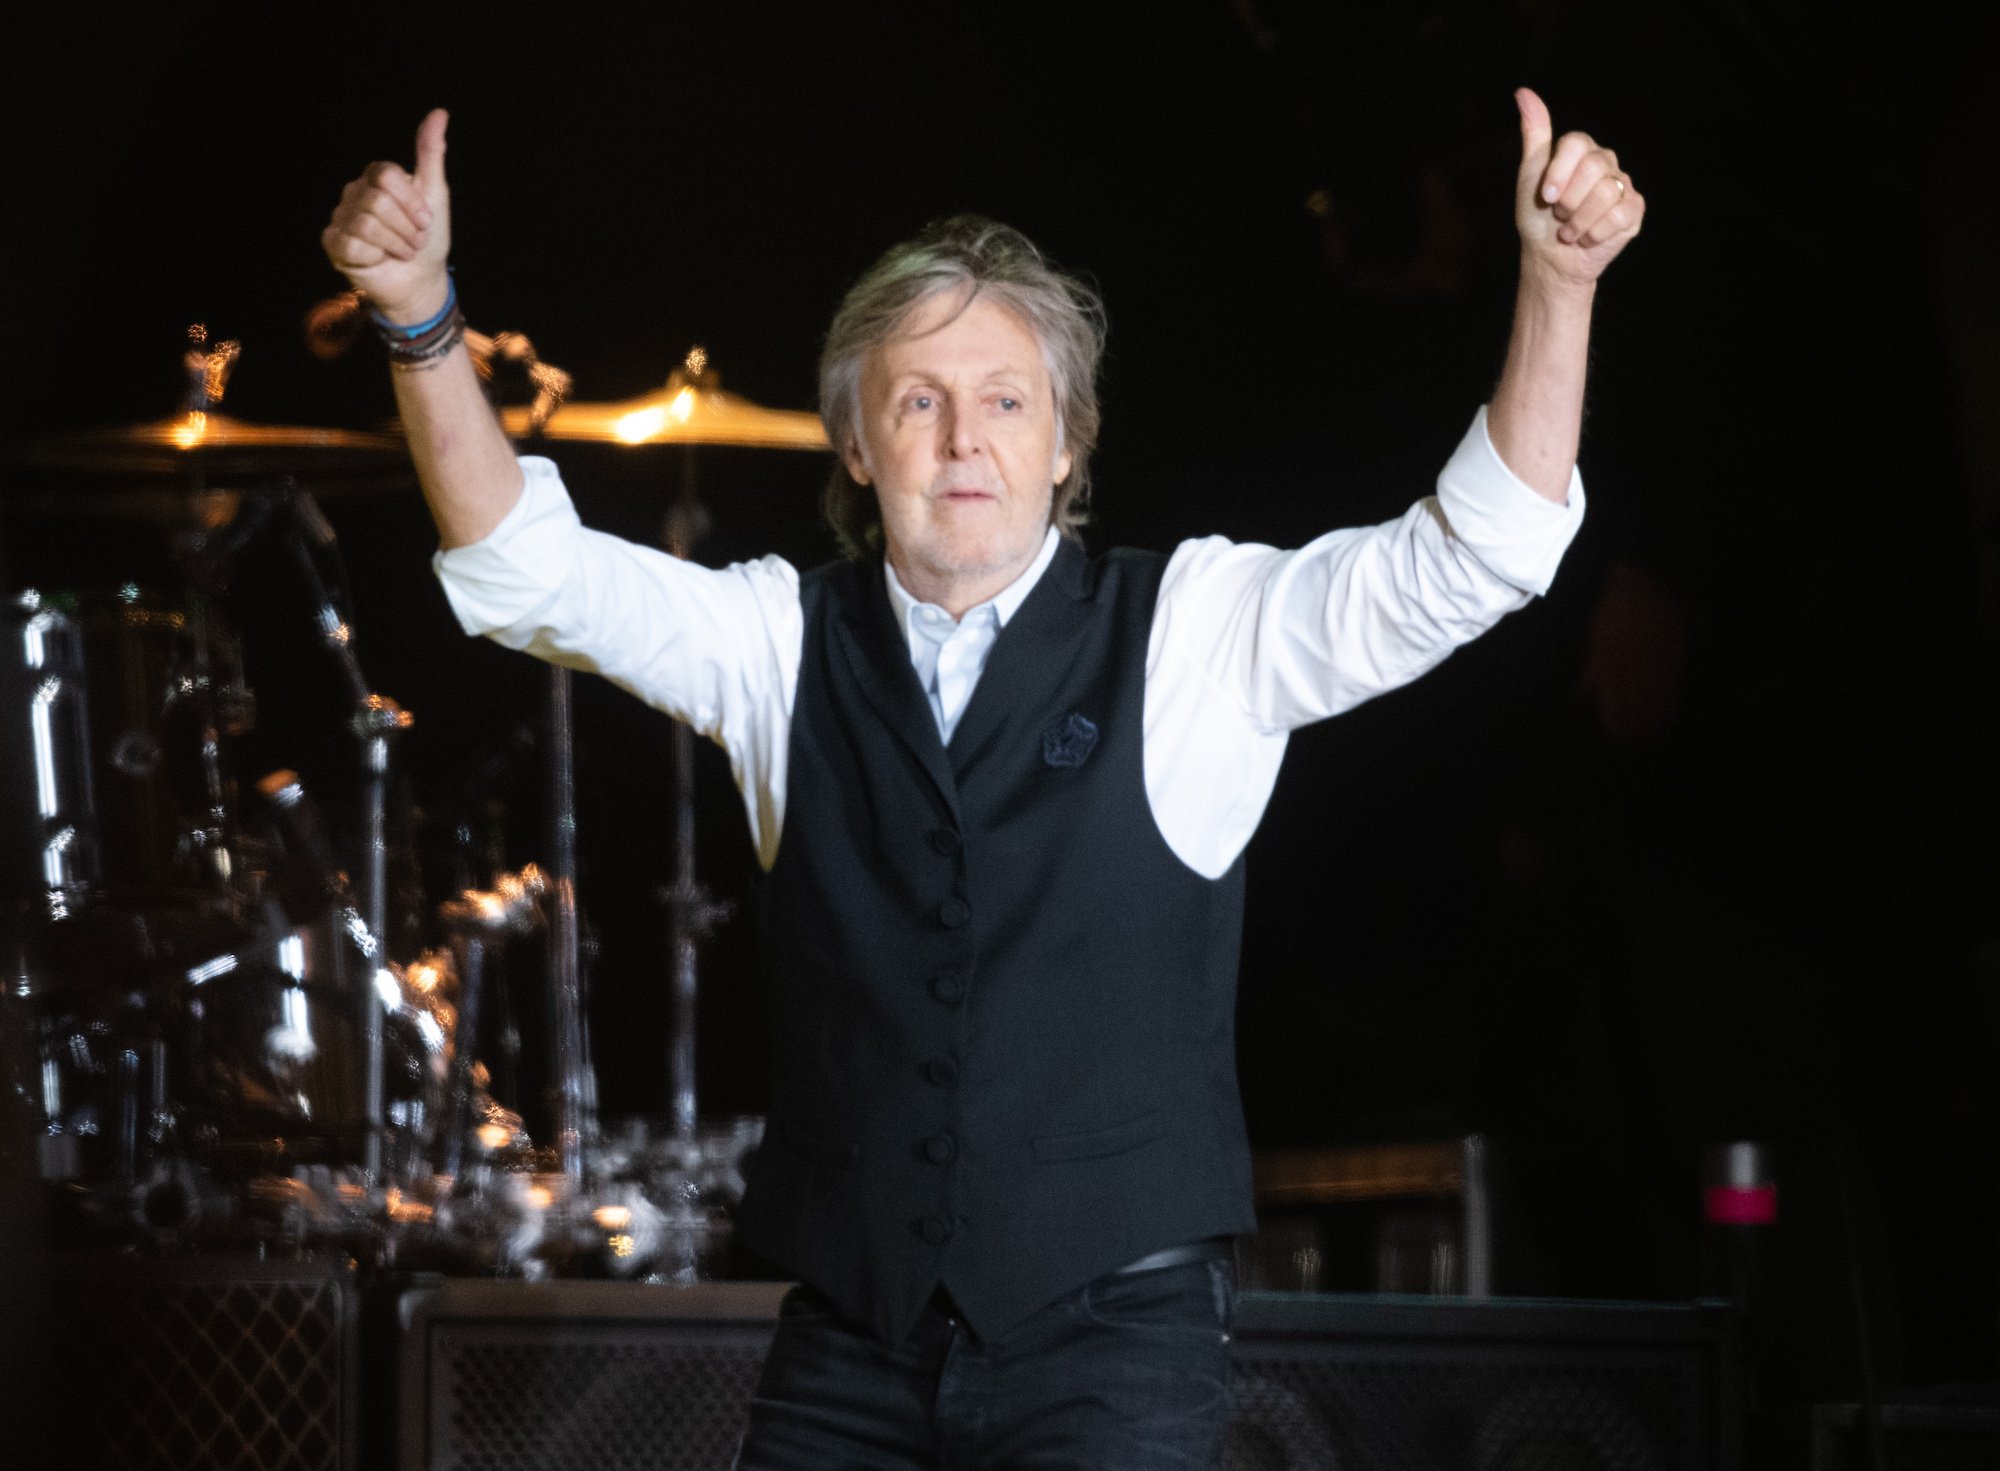 Paul McCartney performs at the Pyramid Stage during the 2022 Glastonbury Festival